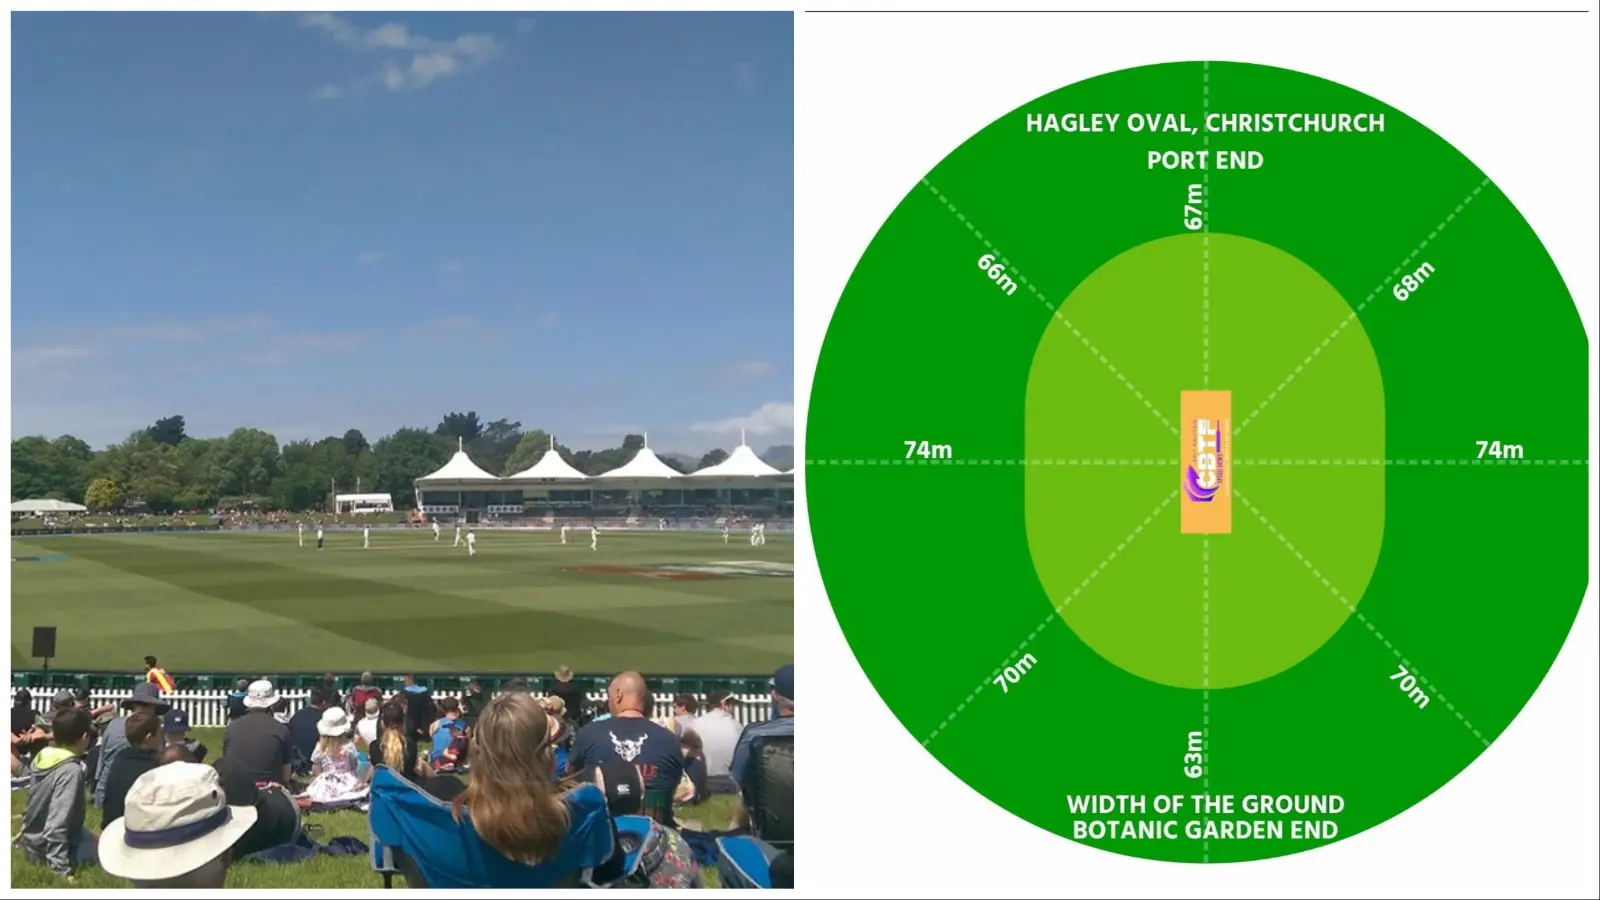 Hagley Oval Cricket Ground Christchurch Boundary Length and Seating Capacity